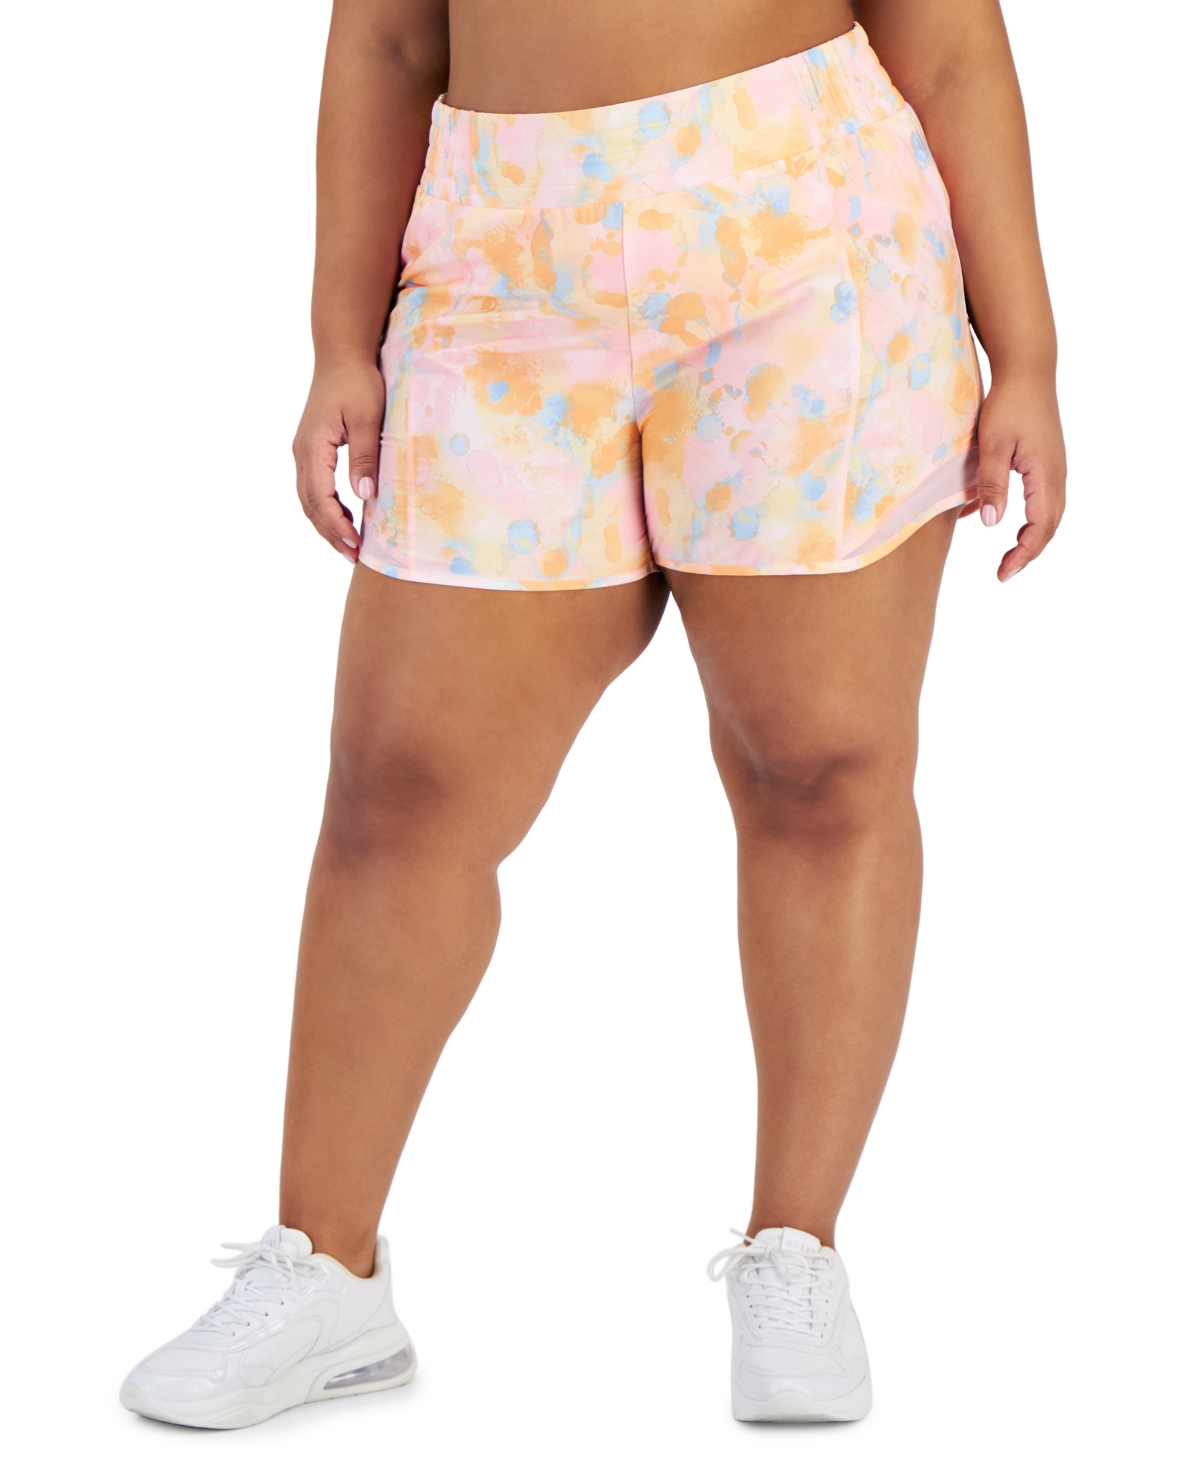 Plus Size Dreamy Bubble Printed Running Shorts, Created for Macy's - Pink Icing